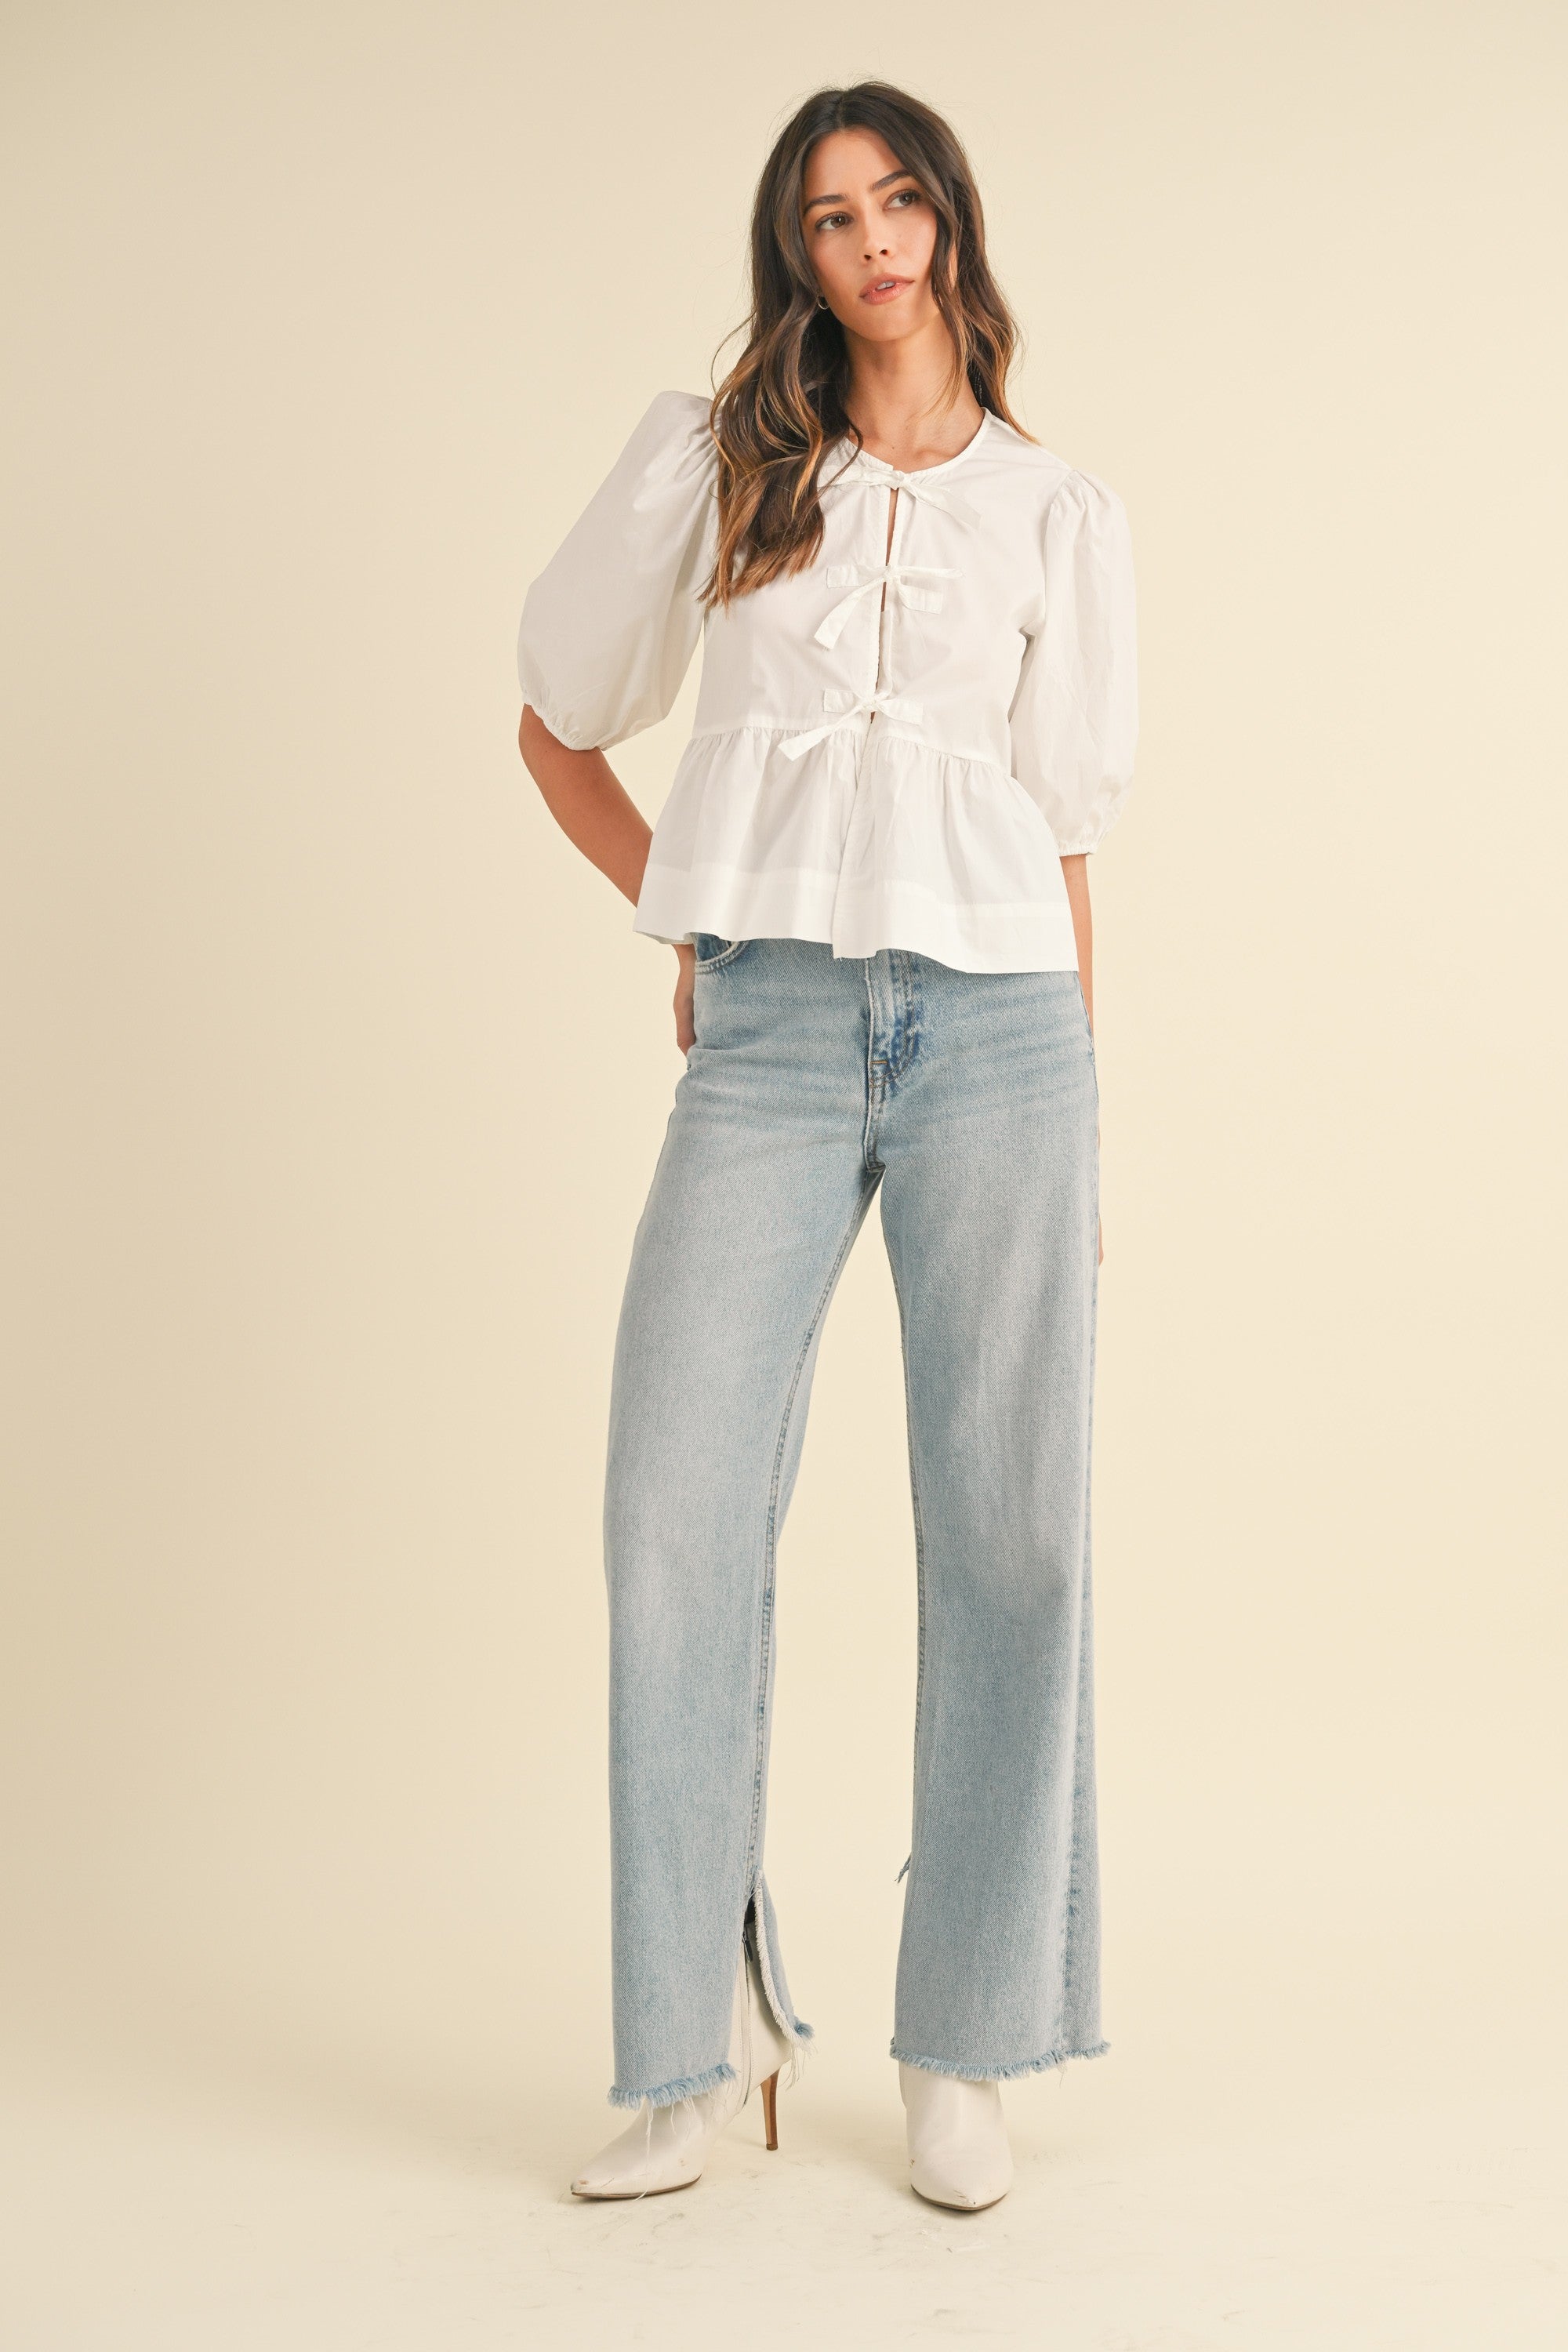 Puff Sleeve Bottom Ruffle Front Tie Top | Collective Request 